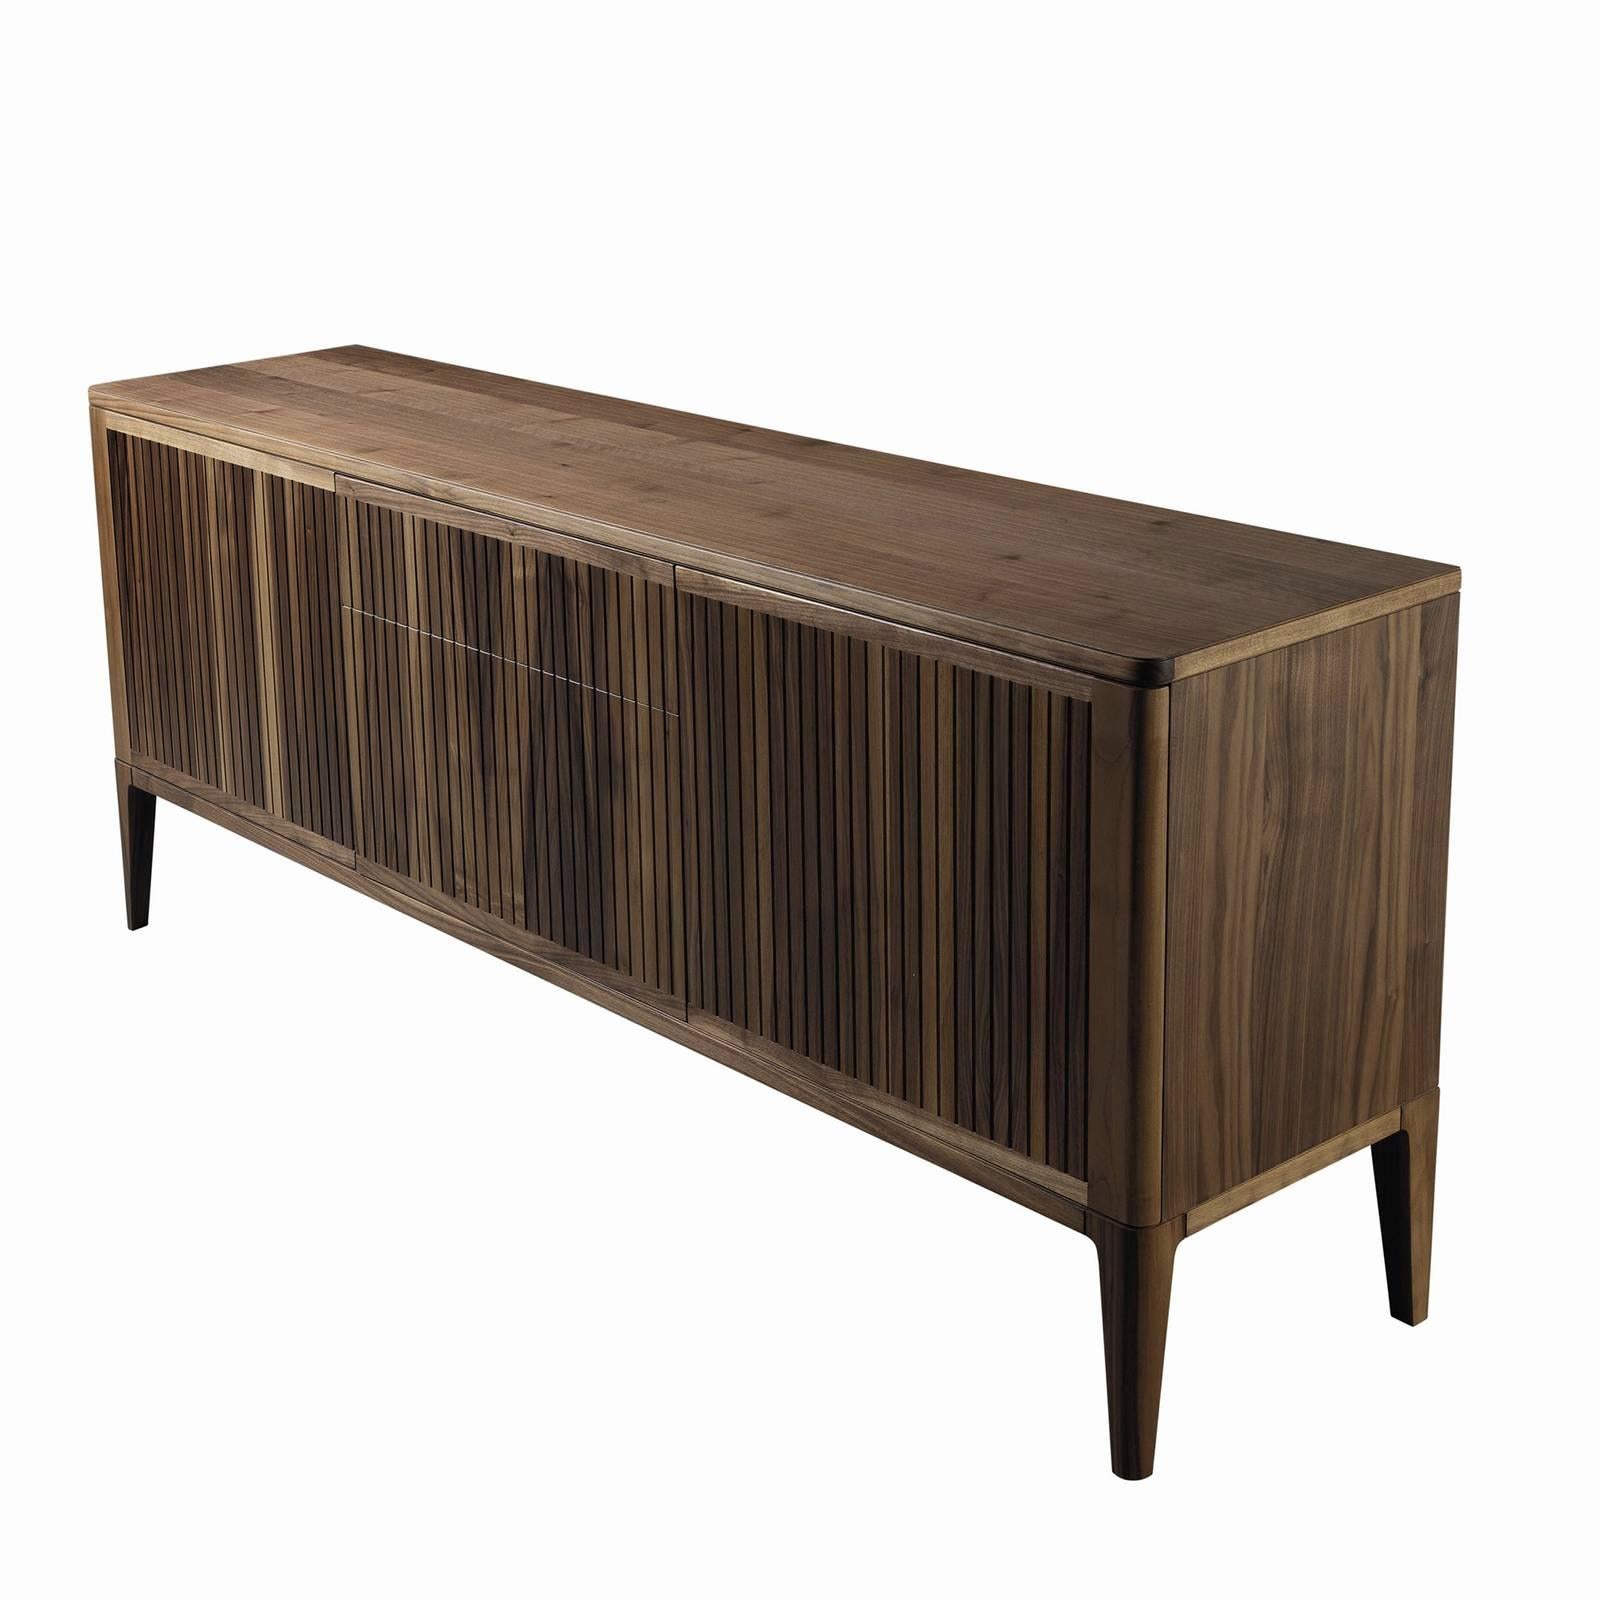 Standing tall on four tapered legs, this impressive sideboard displays a clean approach to contemporary, functional design. Made of the highest quality walnut, the imposing frame features two side doors and a central unit with three drawers whose